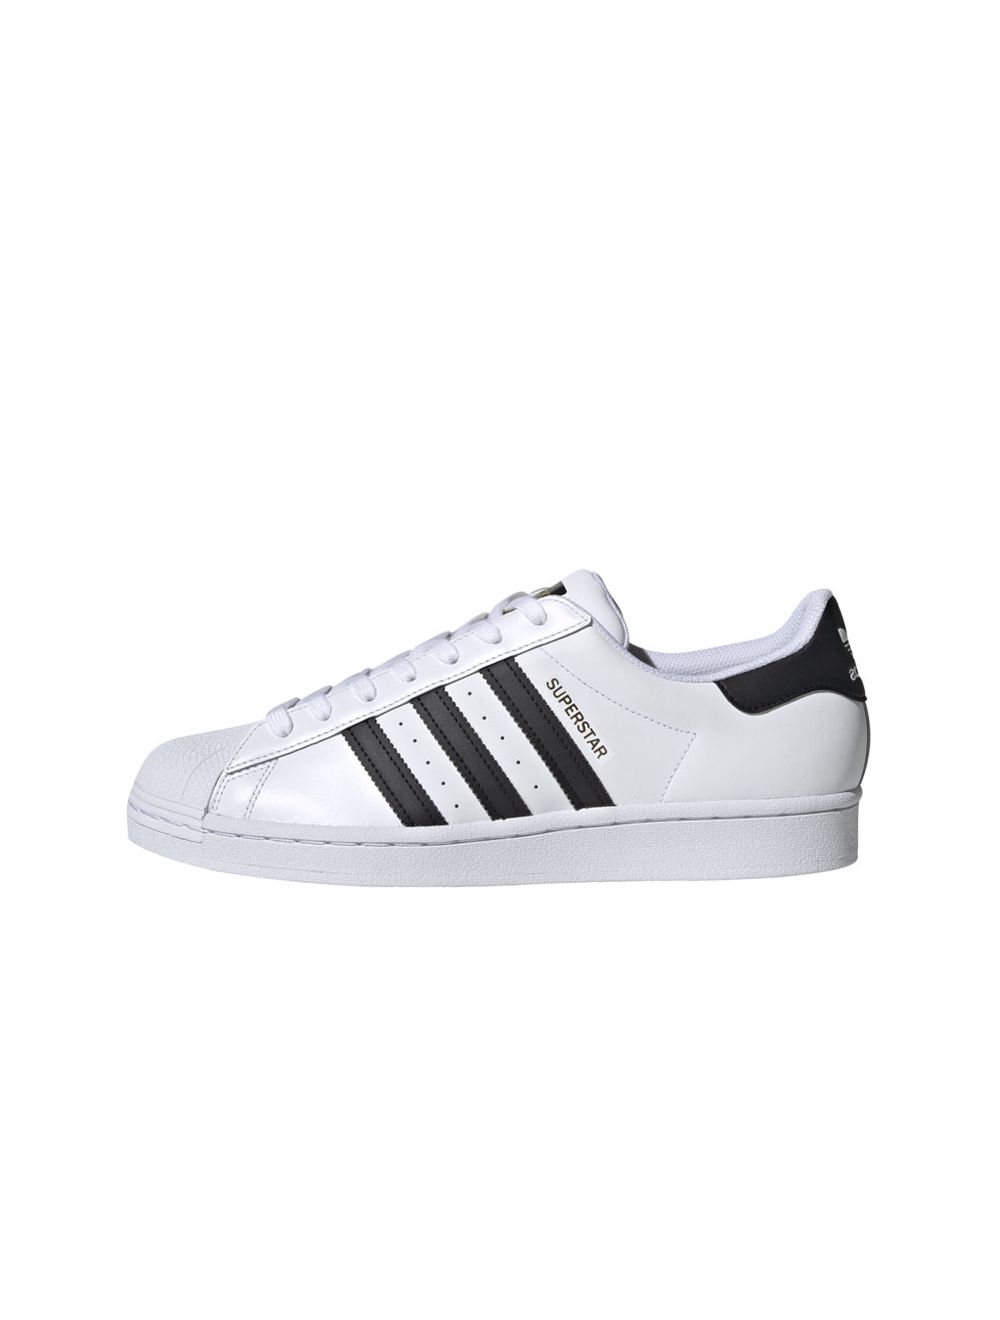 black and white adidas superstar mens